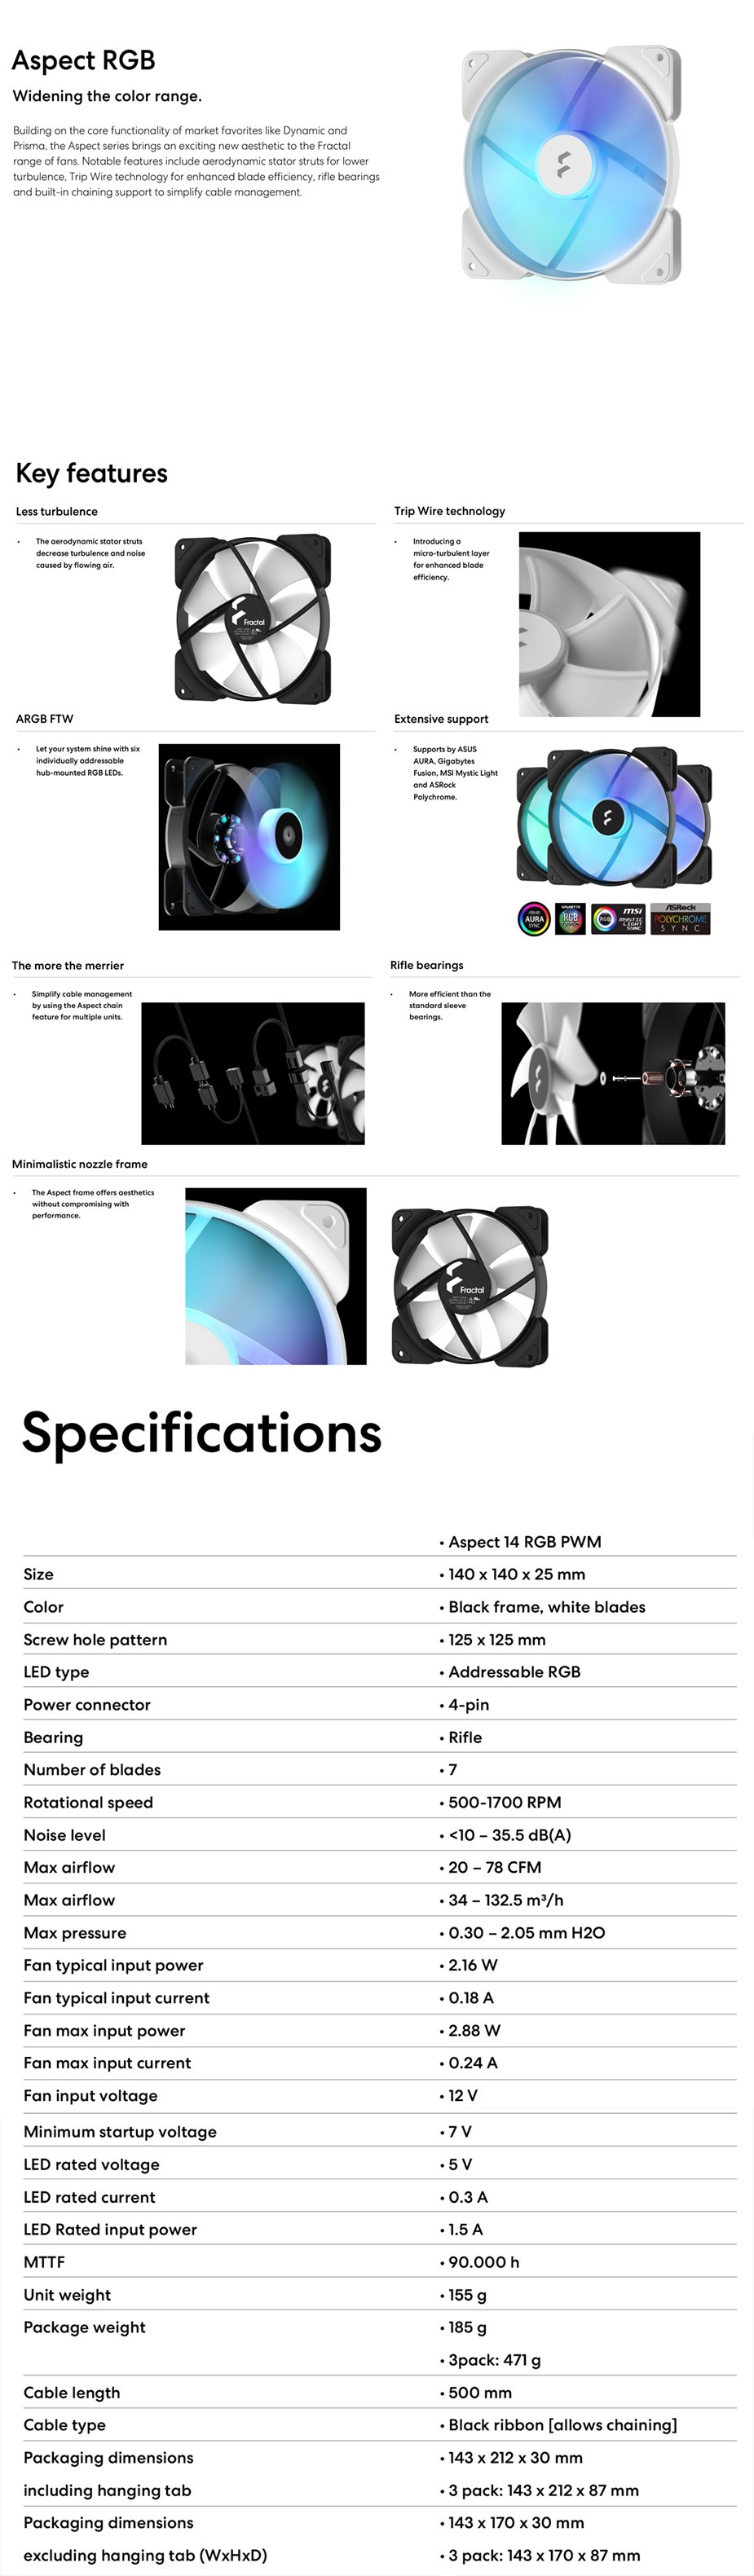 A large marketing image providing additional information about the product Fractal Design Aspect 14 RGB 140mm PWM Fan Black 3-Pack - Additional alt info not provided